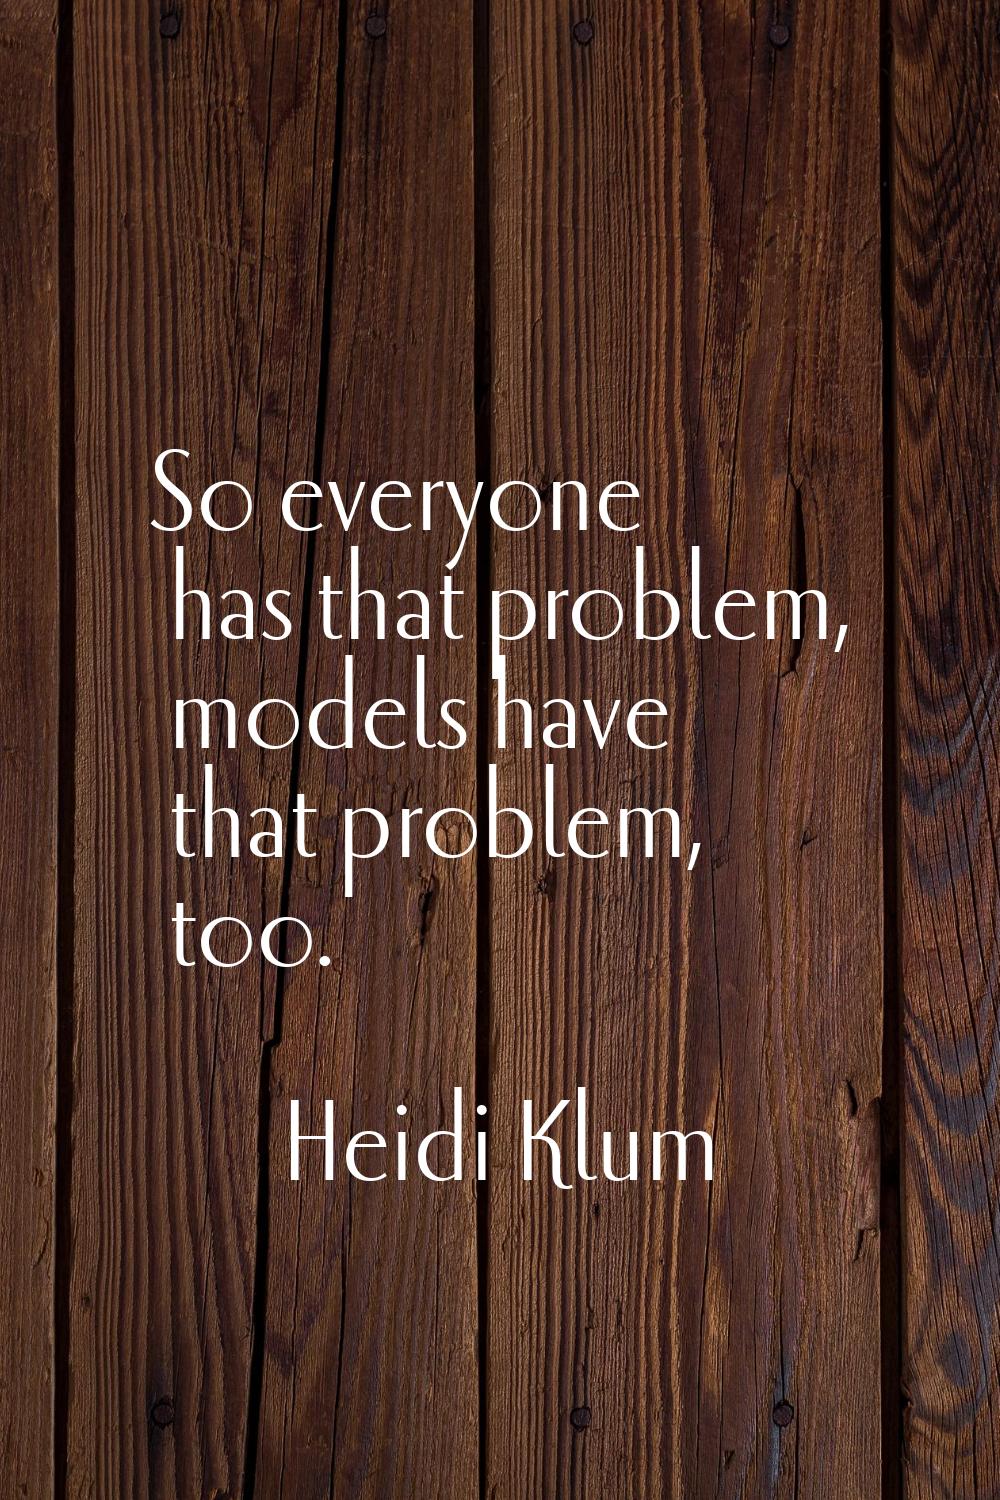 So everyone has that problem, models have that problem, too.